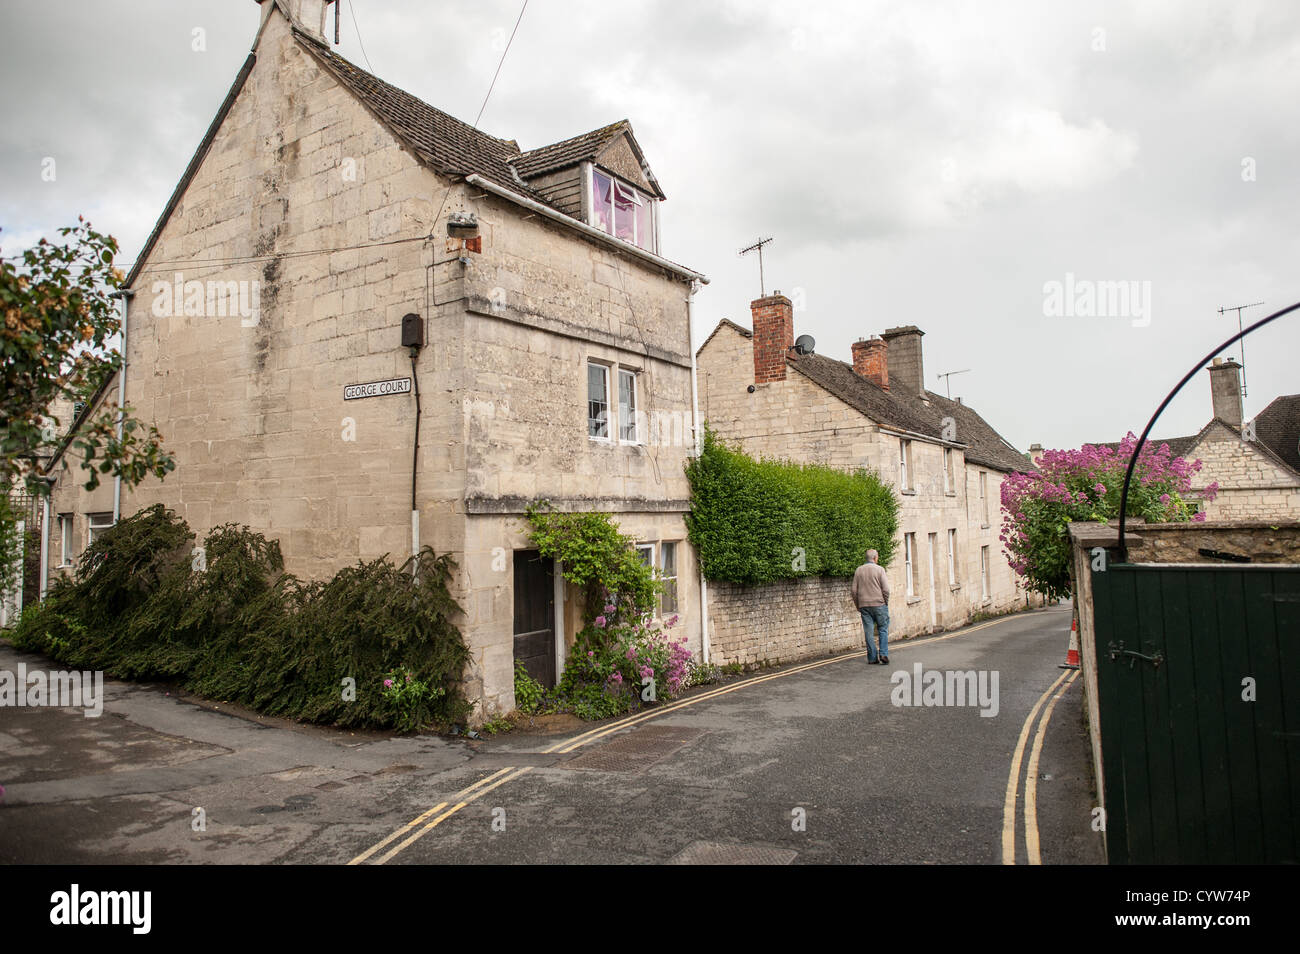 PAINSWICK, UK - Resdiential street in Painswick, Gloucestershire. Stock Photo